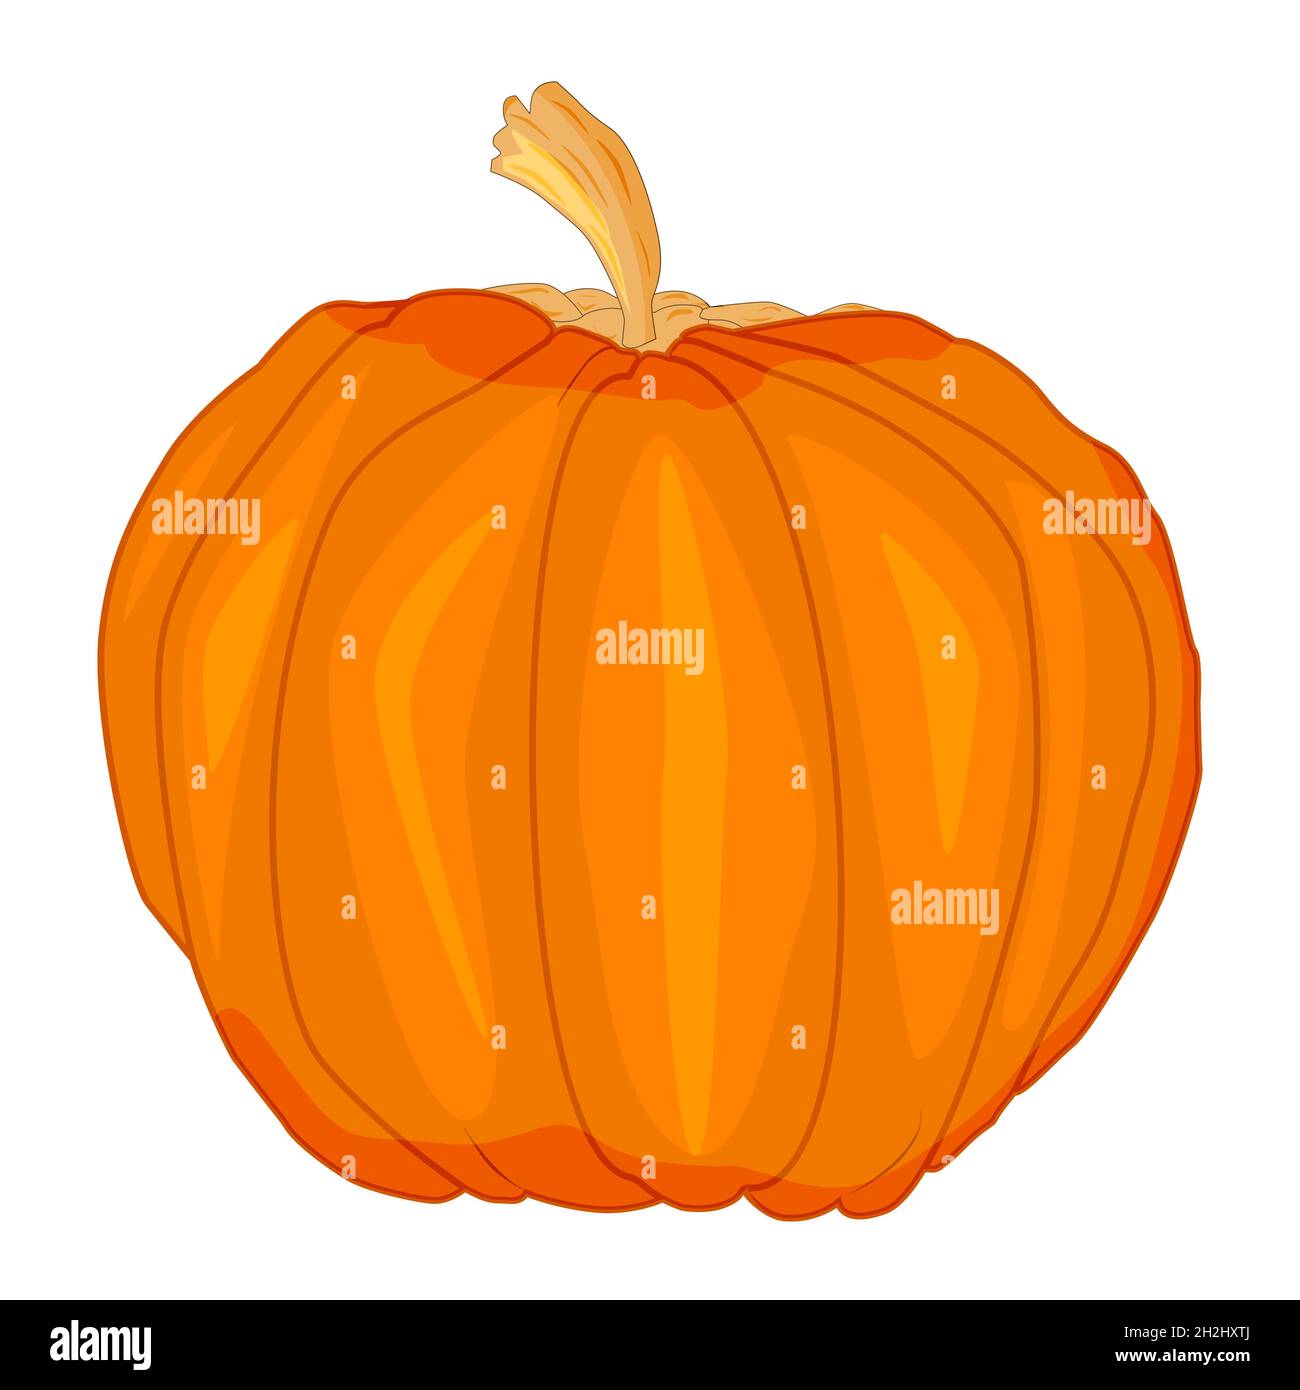 Pumpkin isolated on white background. Orange squash icon. Halloween or thanksgiving day symbol. Ripe gourd for autumn harvest festival sign. Vector Stock Vector